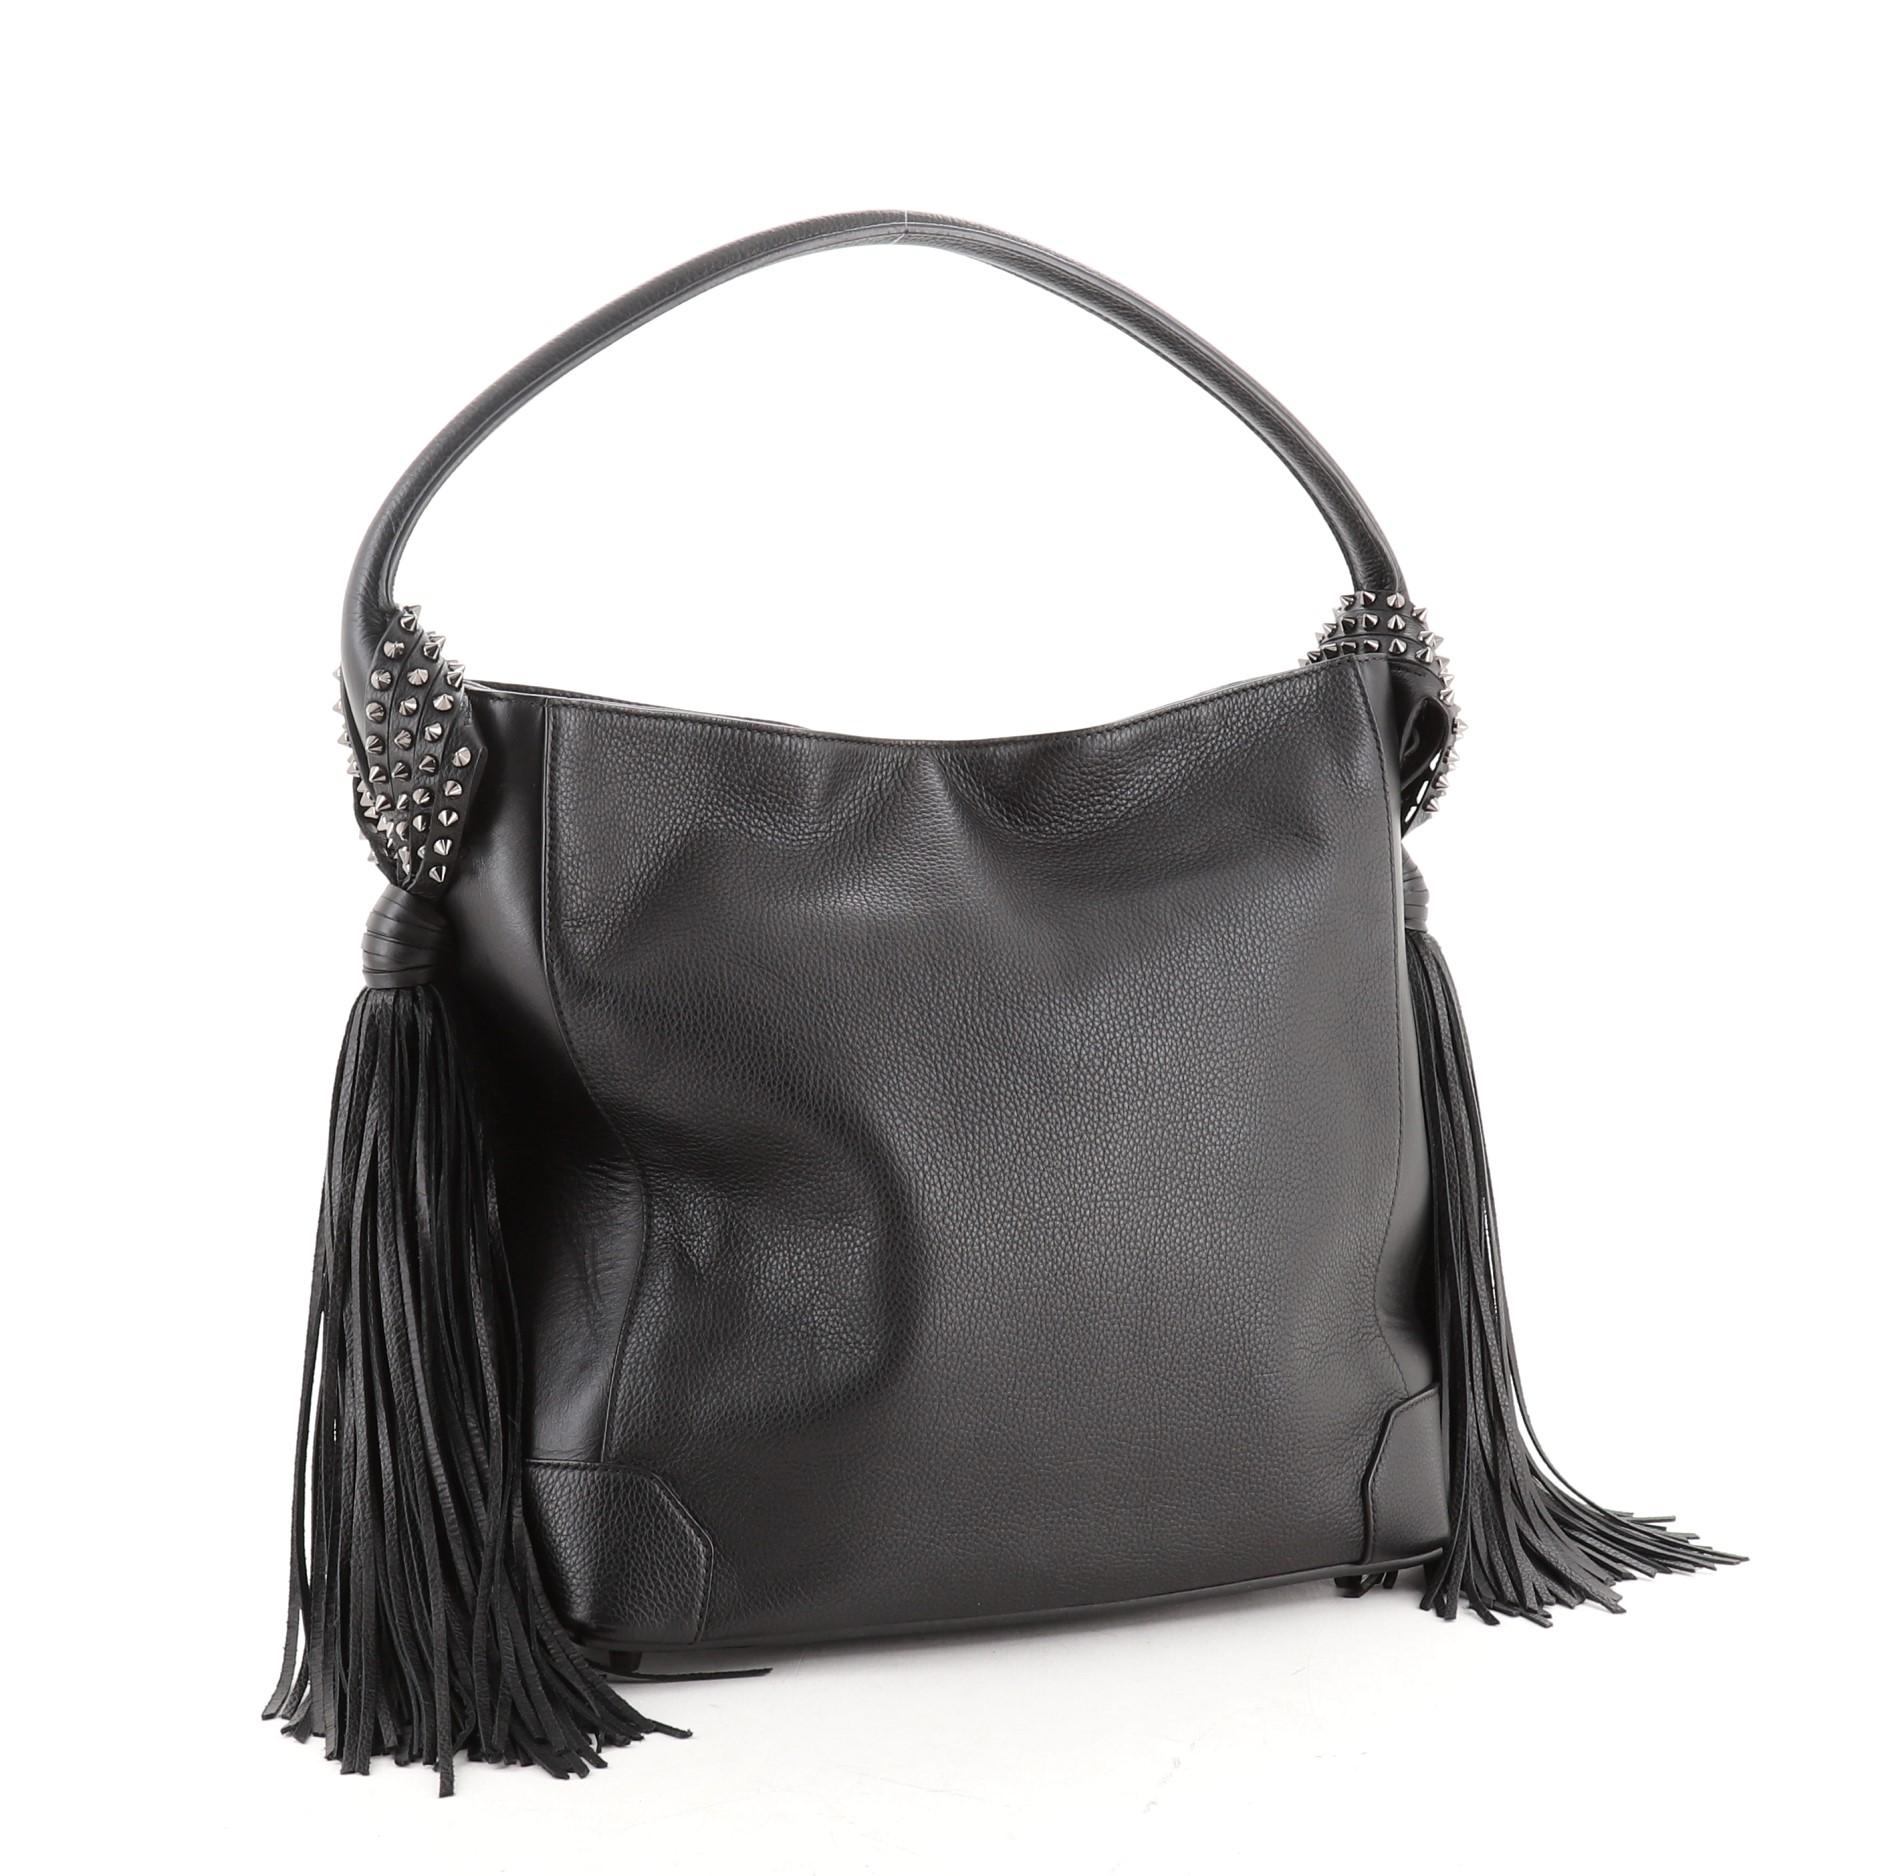 Christian Louboutin Eloise Fringe Hobo Leather Medium
Black

Condition Details: Creasing on exterior, wear on base corners, scratches on hardware.

51003MSC

Height 12